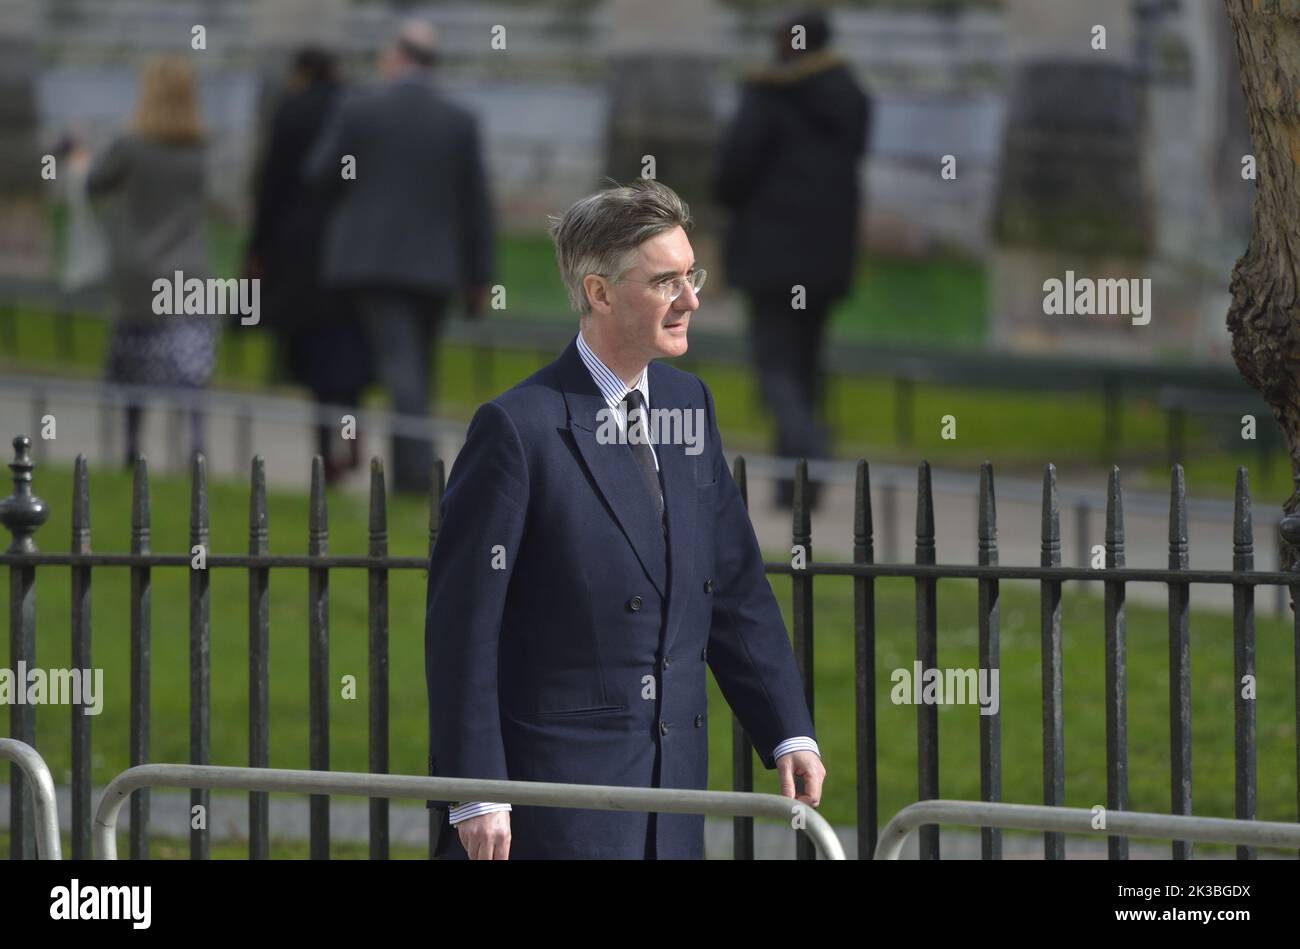 Jacob Rees-Mogg MP (Con: N E Somerset) bei der Ankunft beim Commonwealth Service in Westminster Abbey, London, 14.. März 2022. Stockfoto